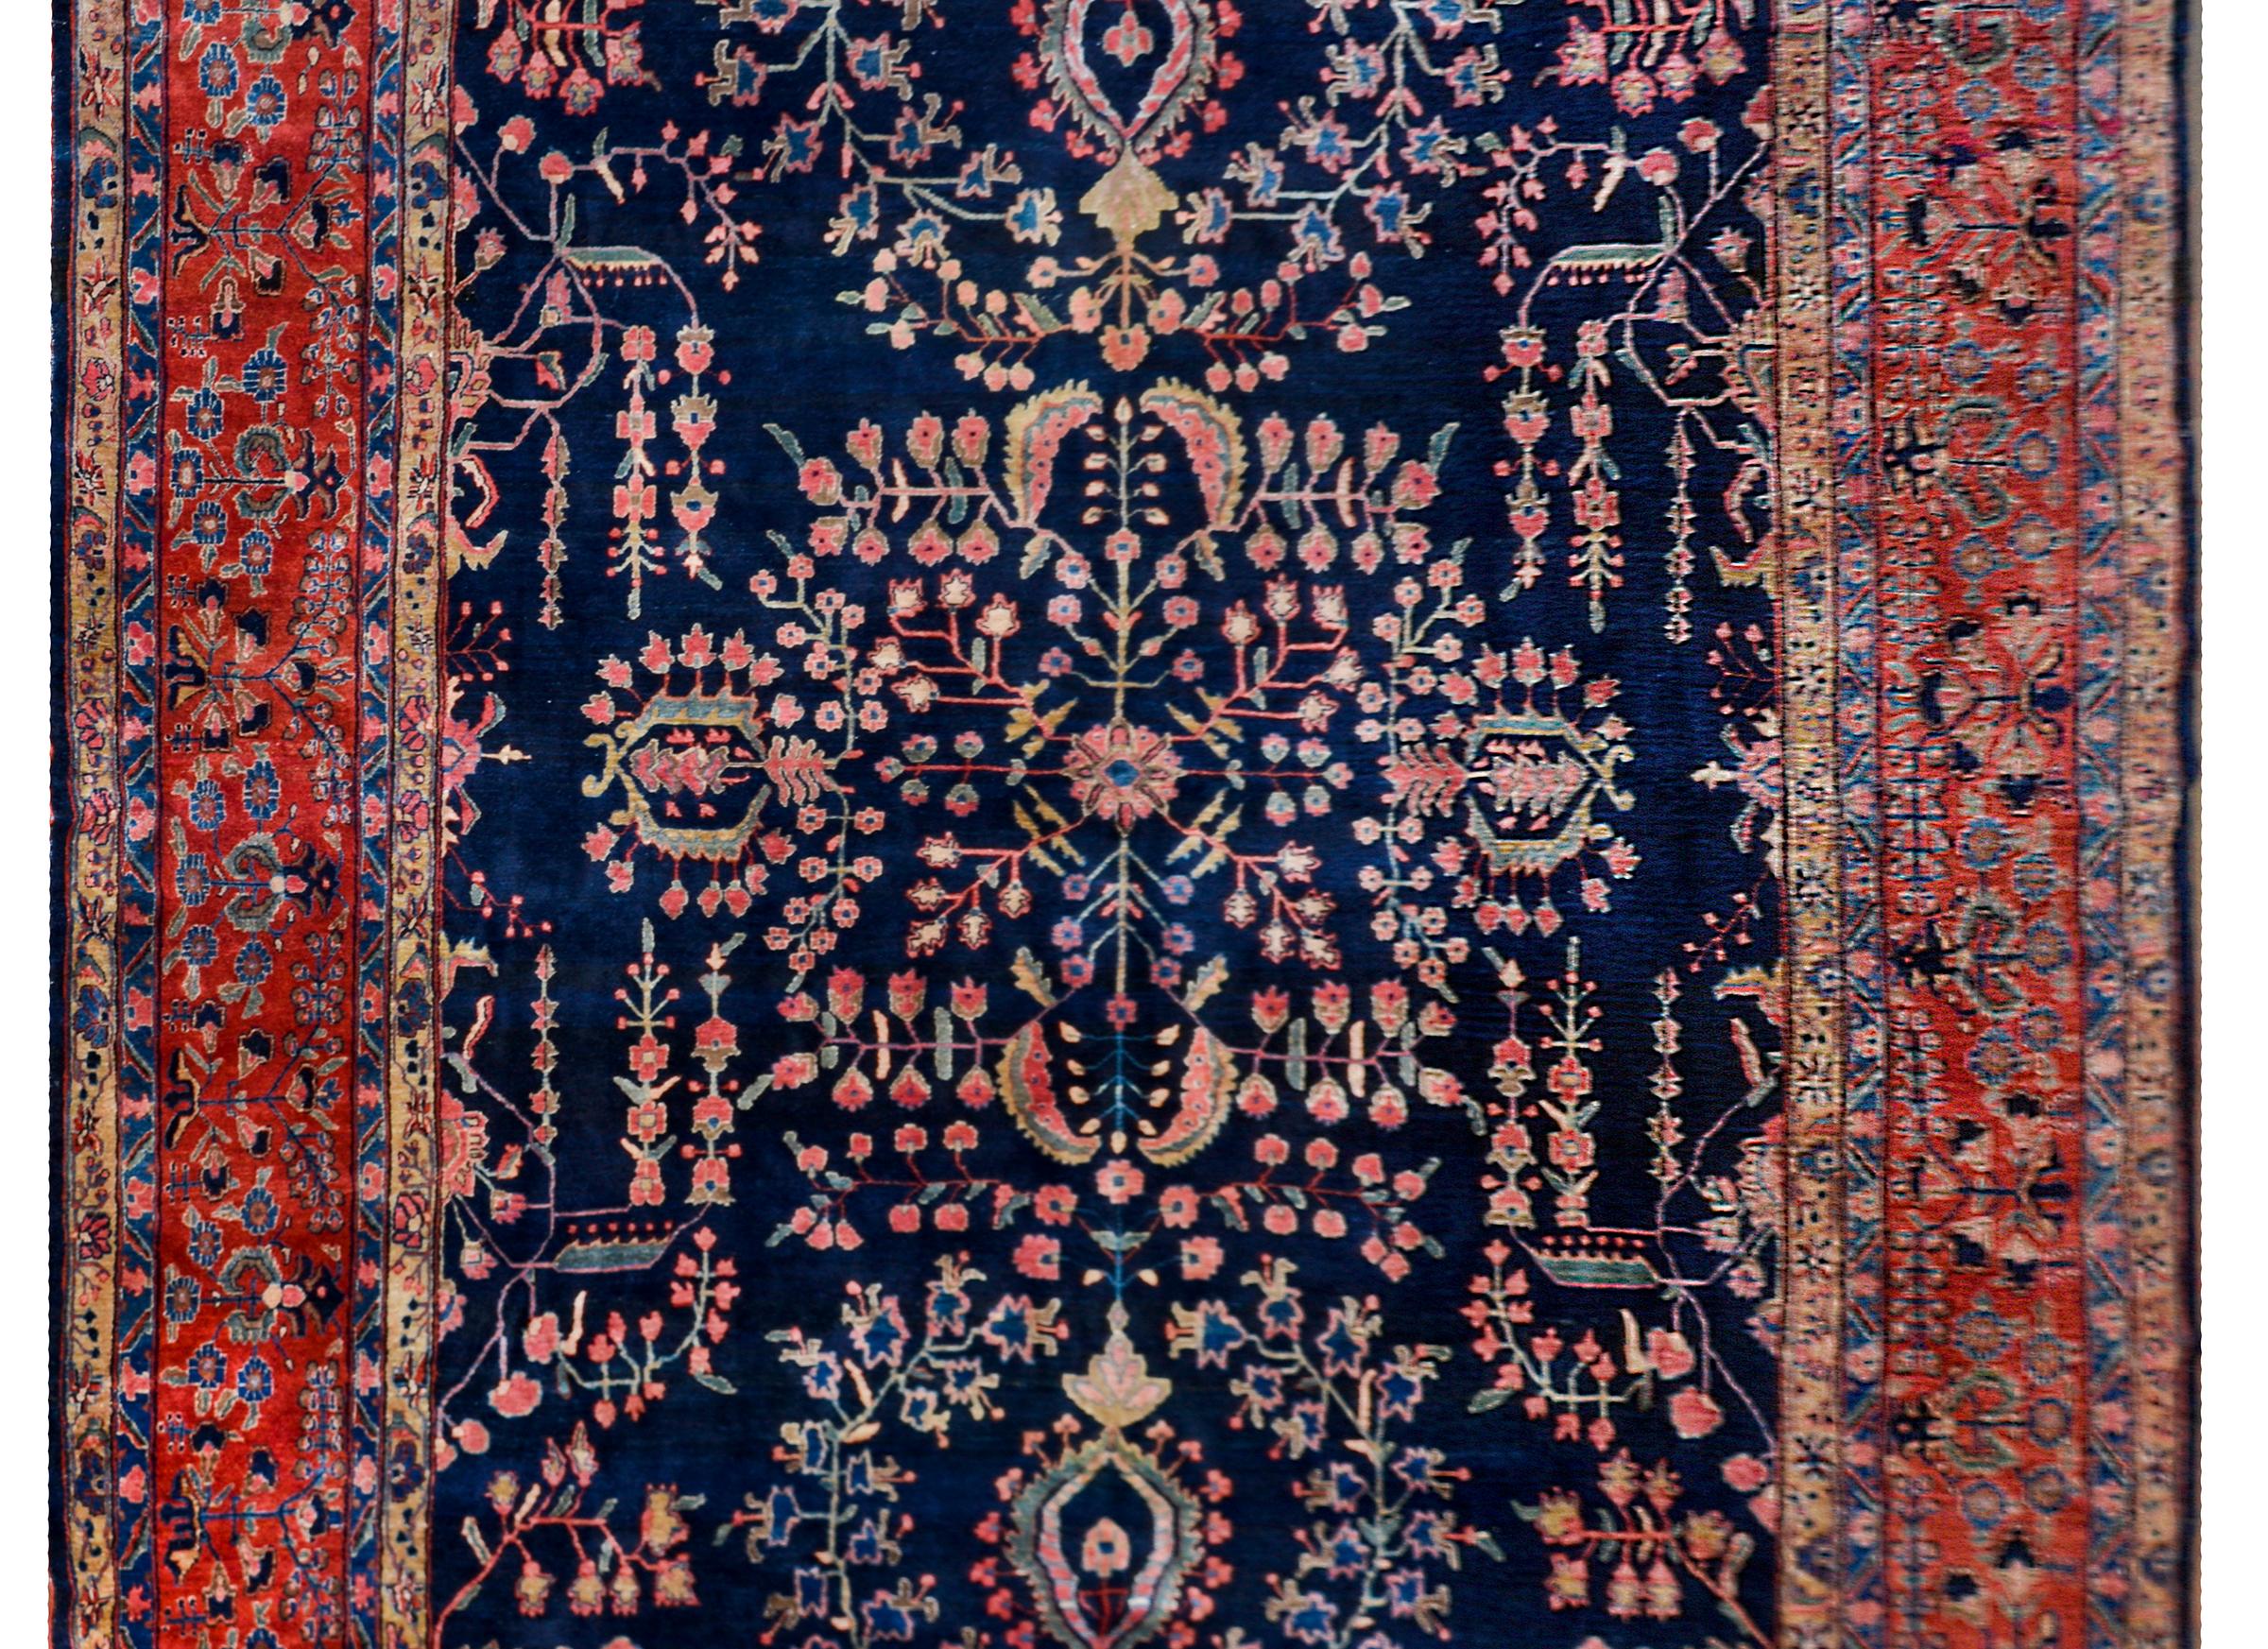 An incredible early 20th century Persian Sarouk Mohajeran rug with a traditional mirrored floral pattern woven in crimsons, pinks, creams, and indigos, against a dark indigo background. The border is complex with multiple floral patterned stripes